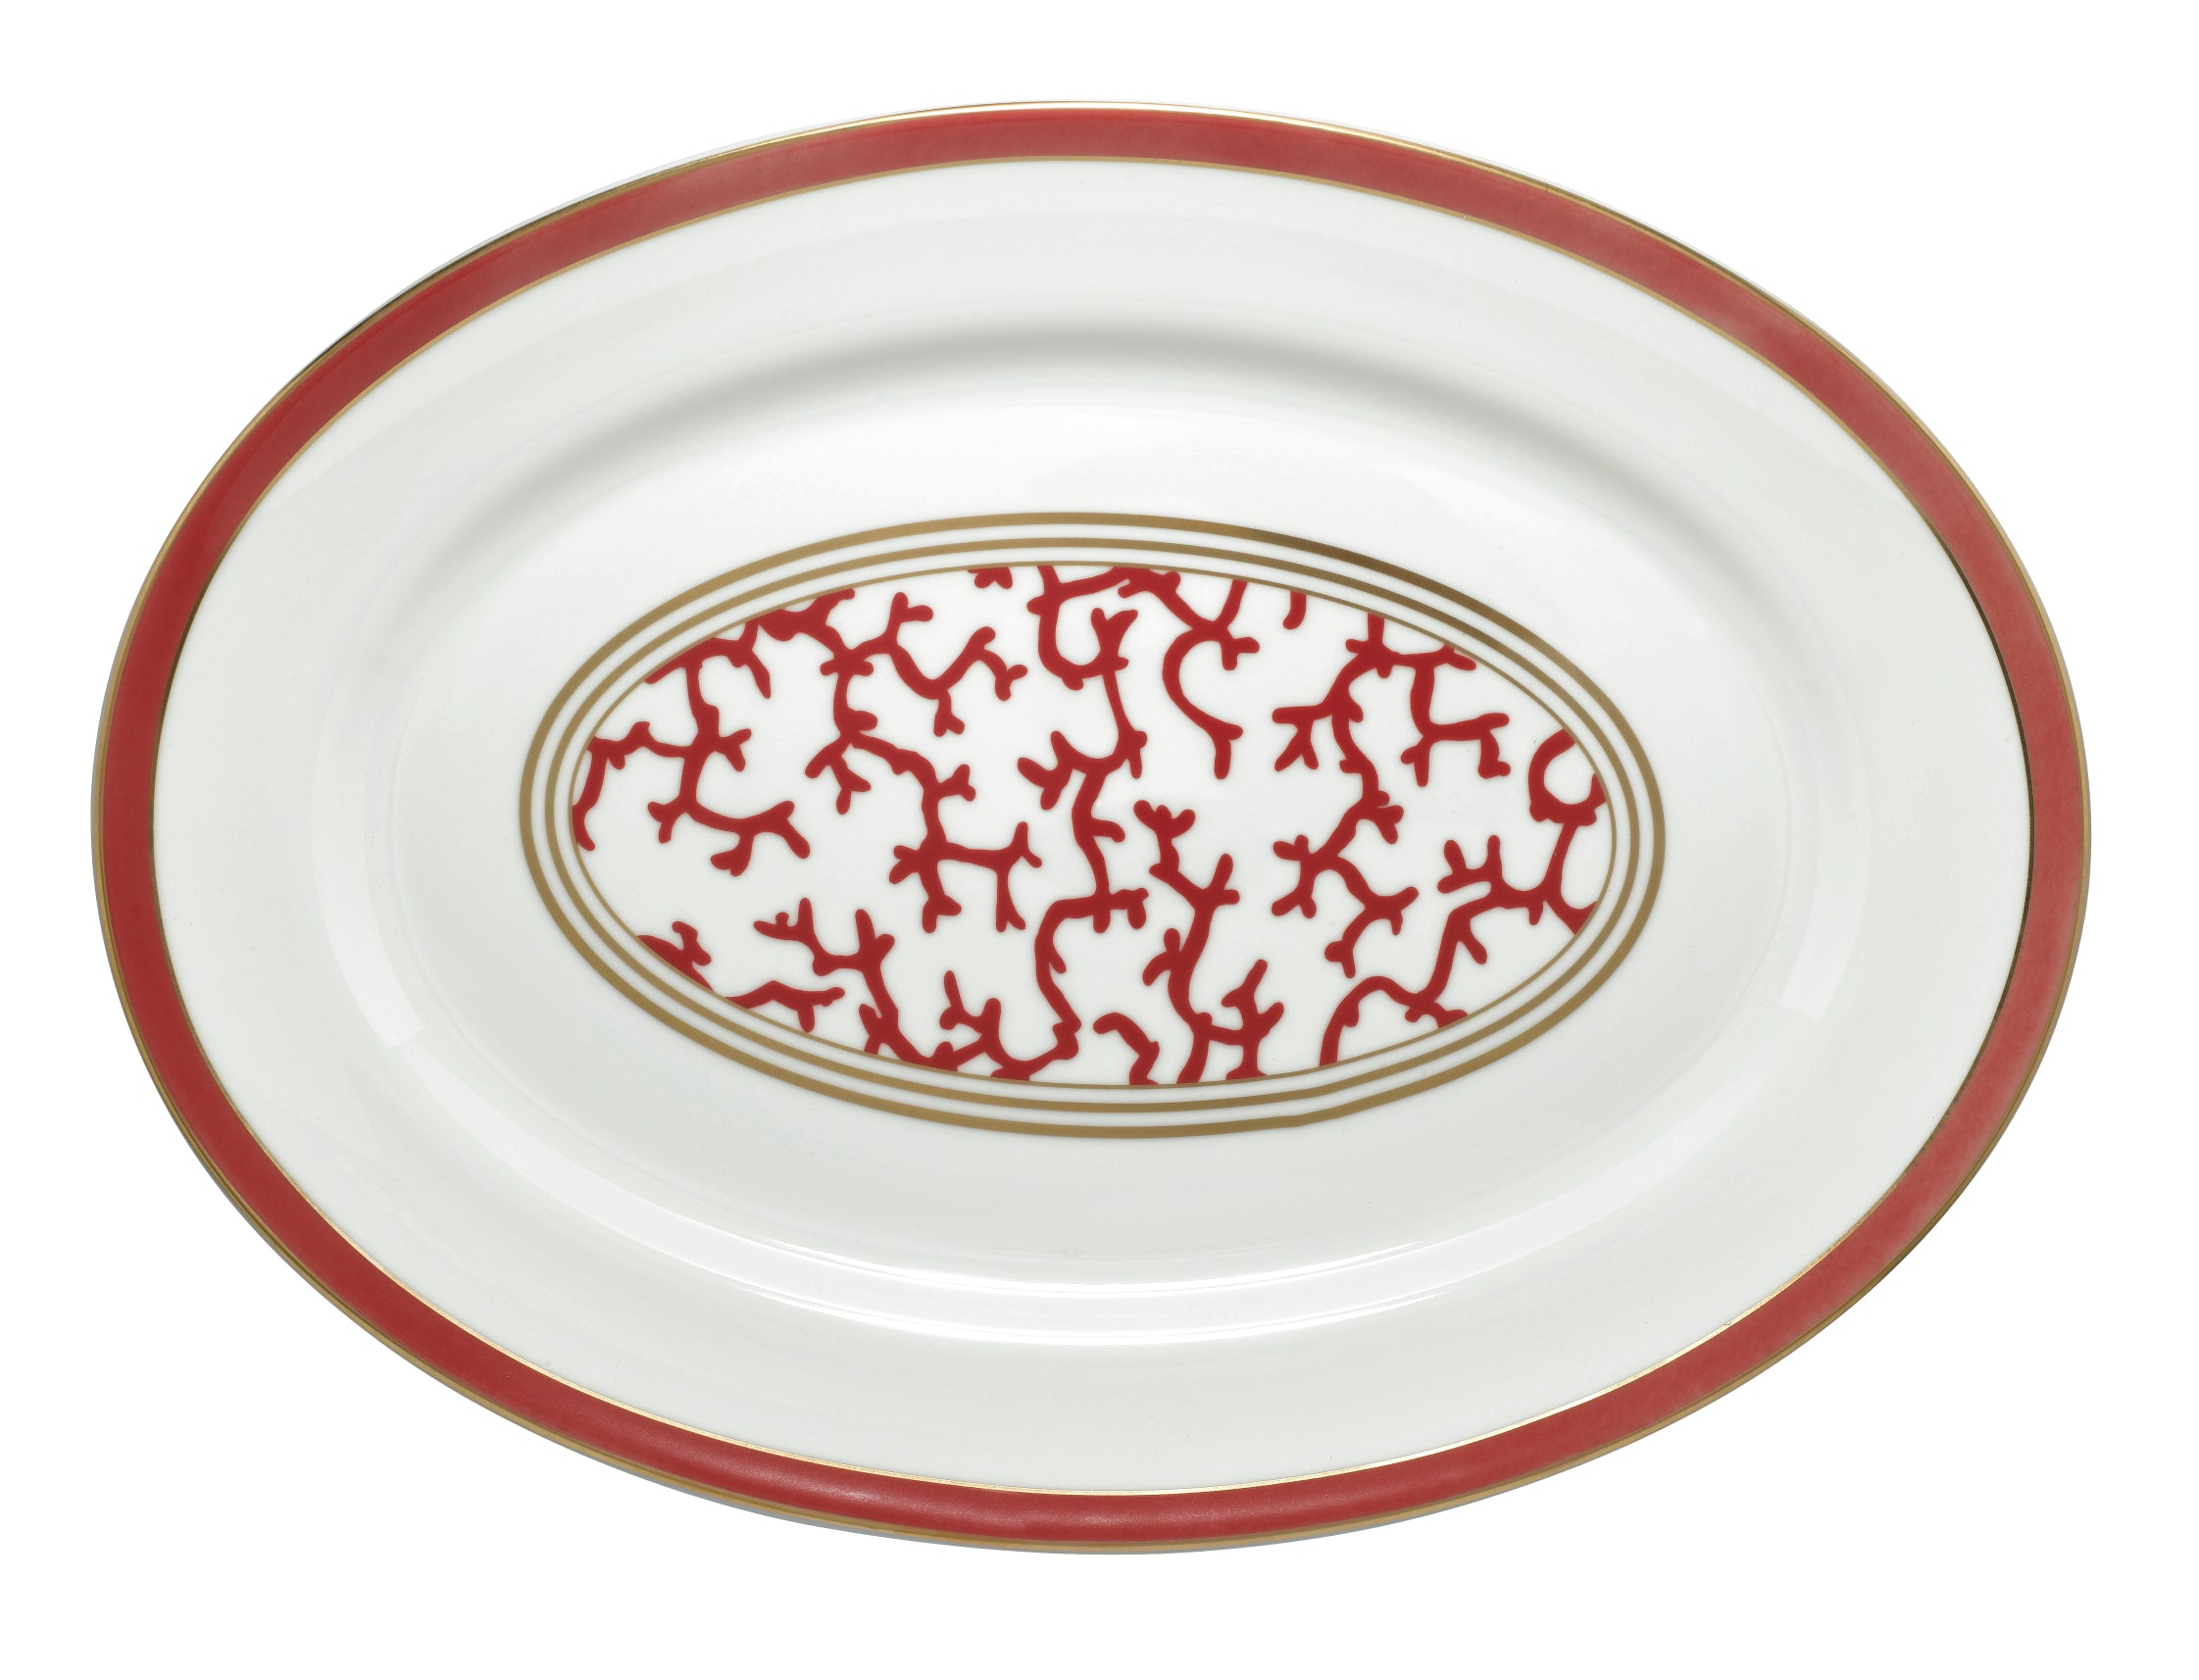 Cristobal Red - Large Oval Dish 16.1 in X 11.8 in